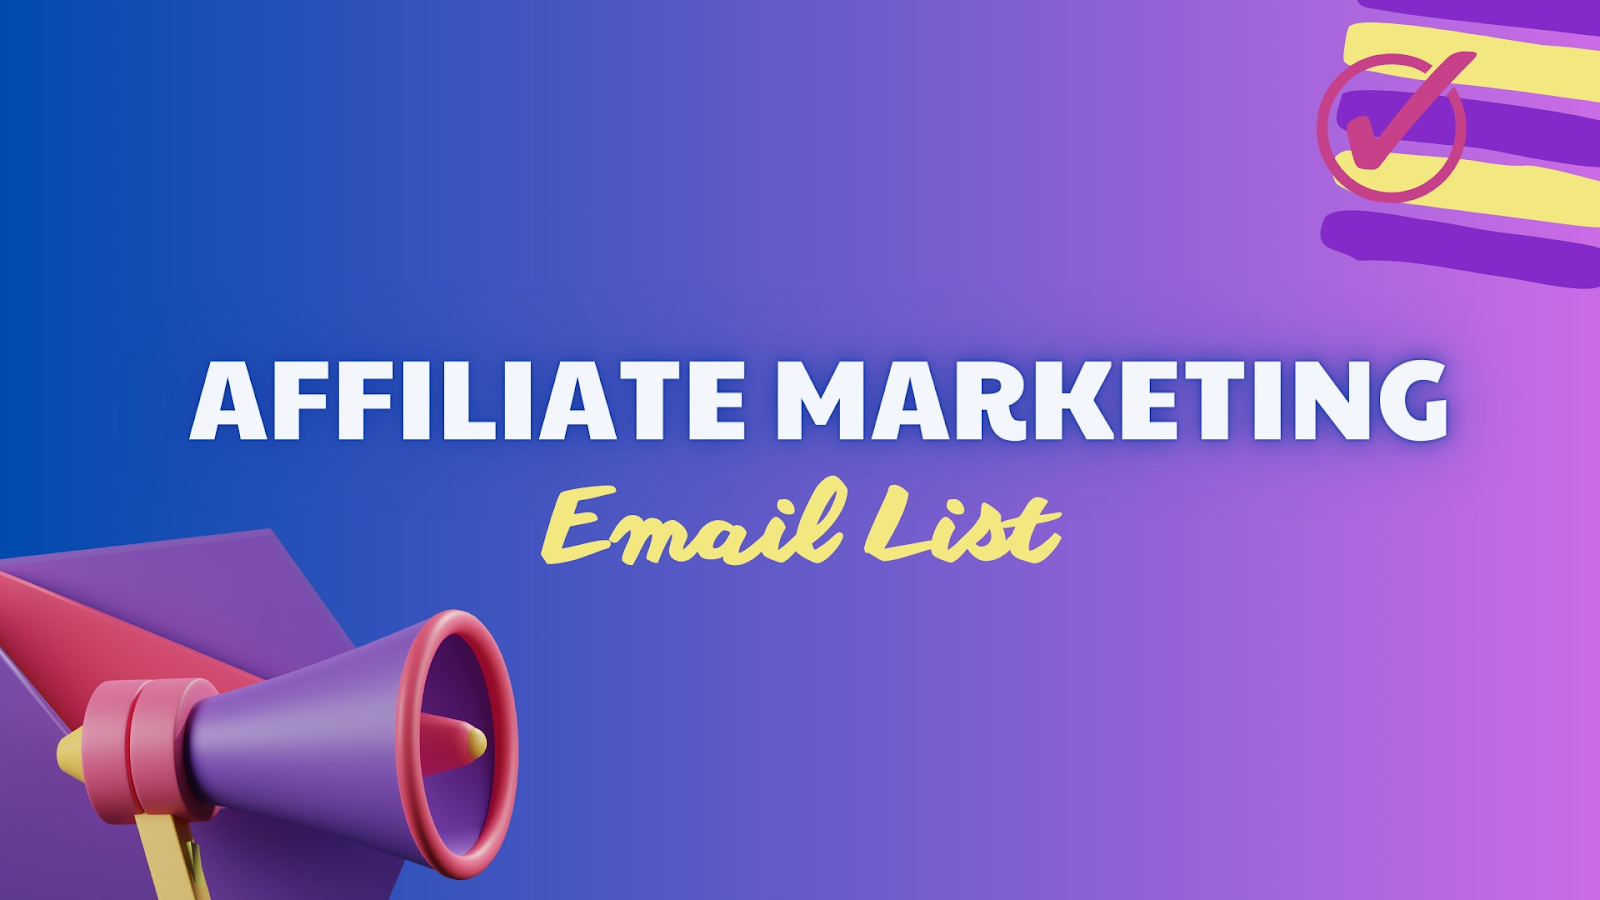 What is an Affiliate Marketing Email List